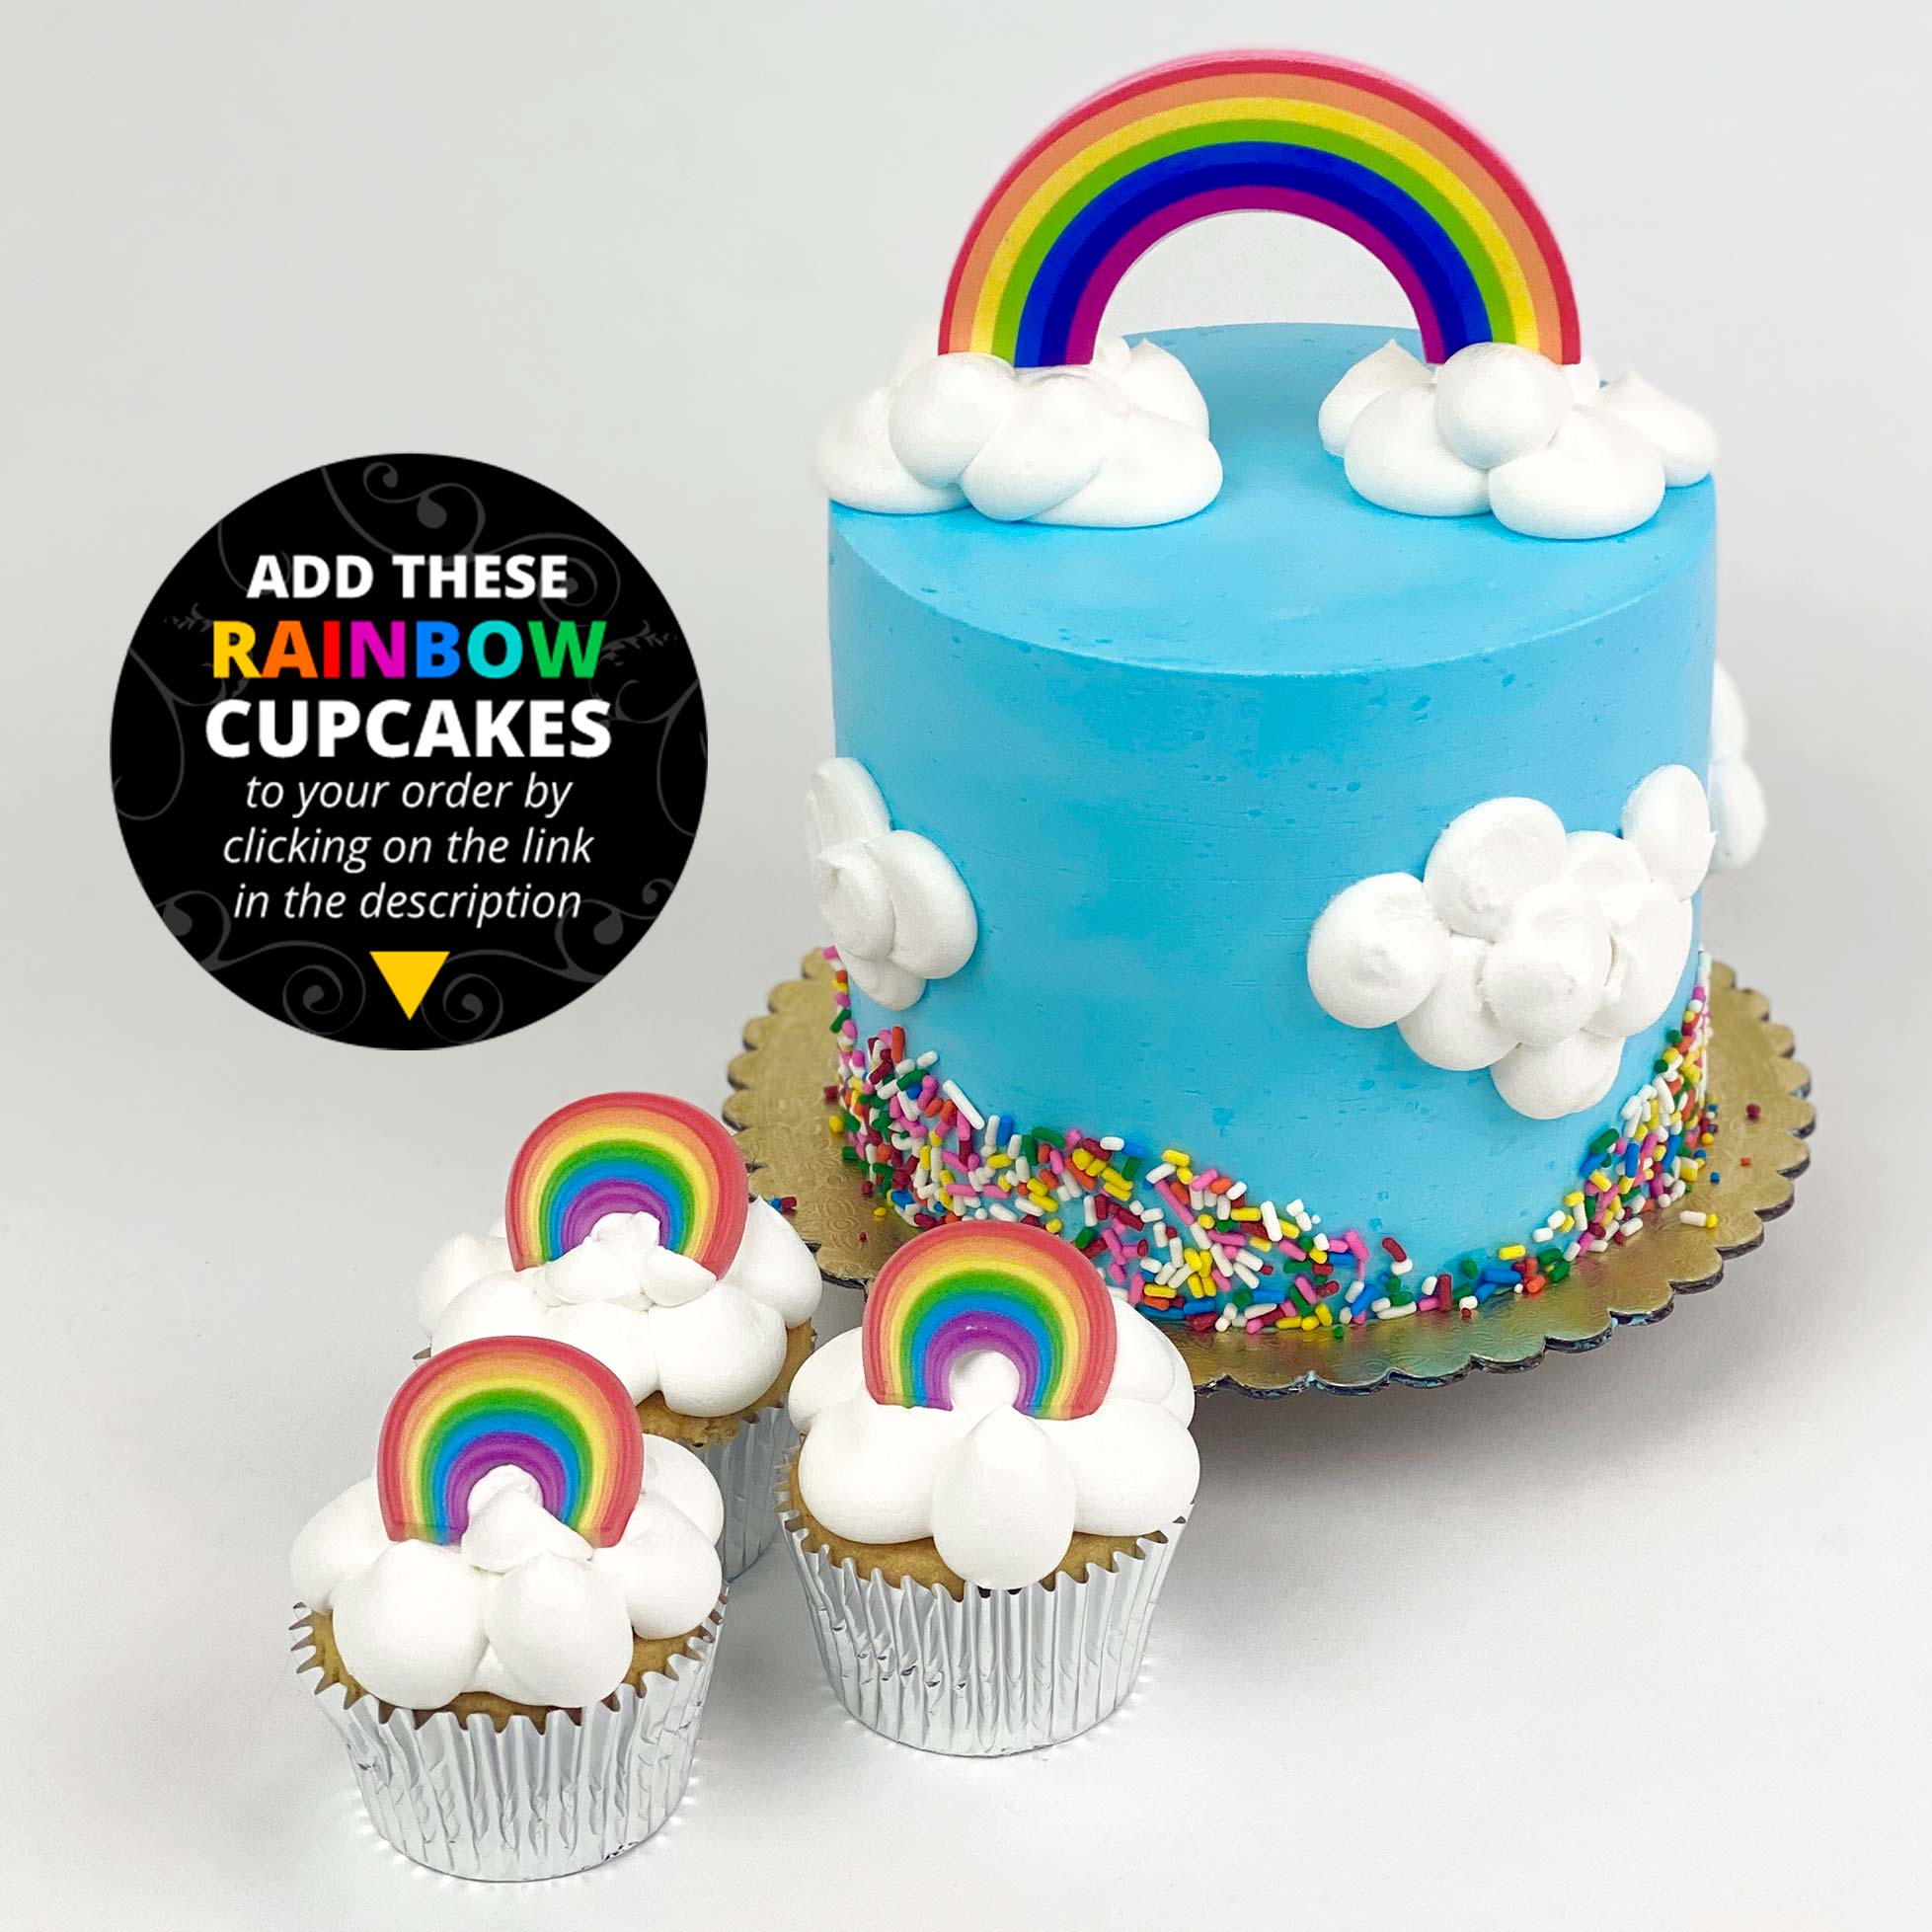 Rainbow and Clouds Cake. Add these rainbow cupcakes to your order by clicking on the link in the description.